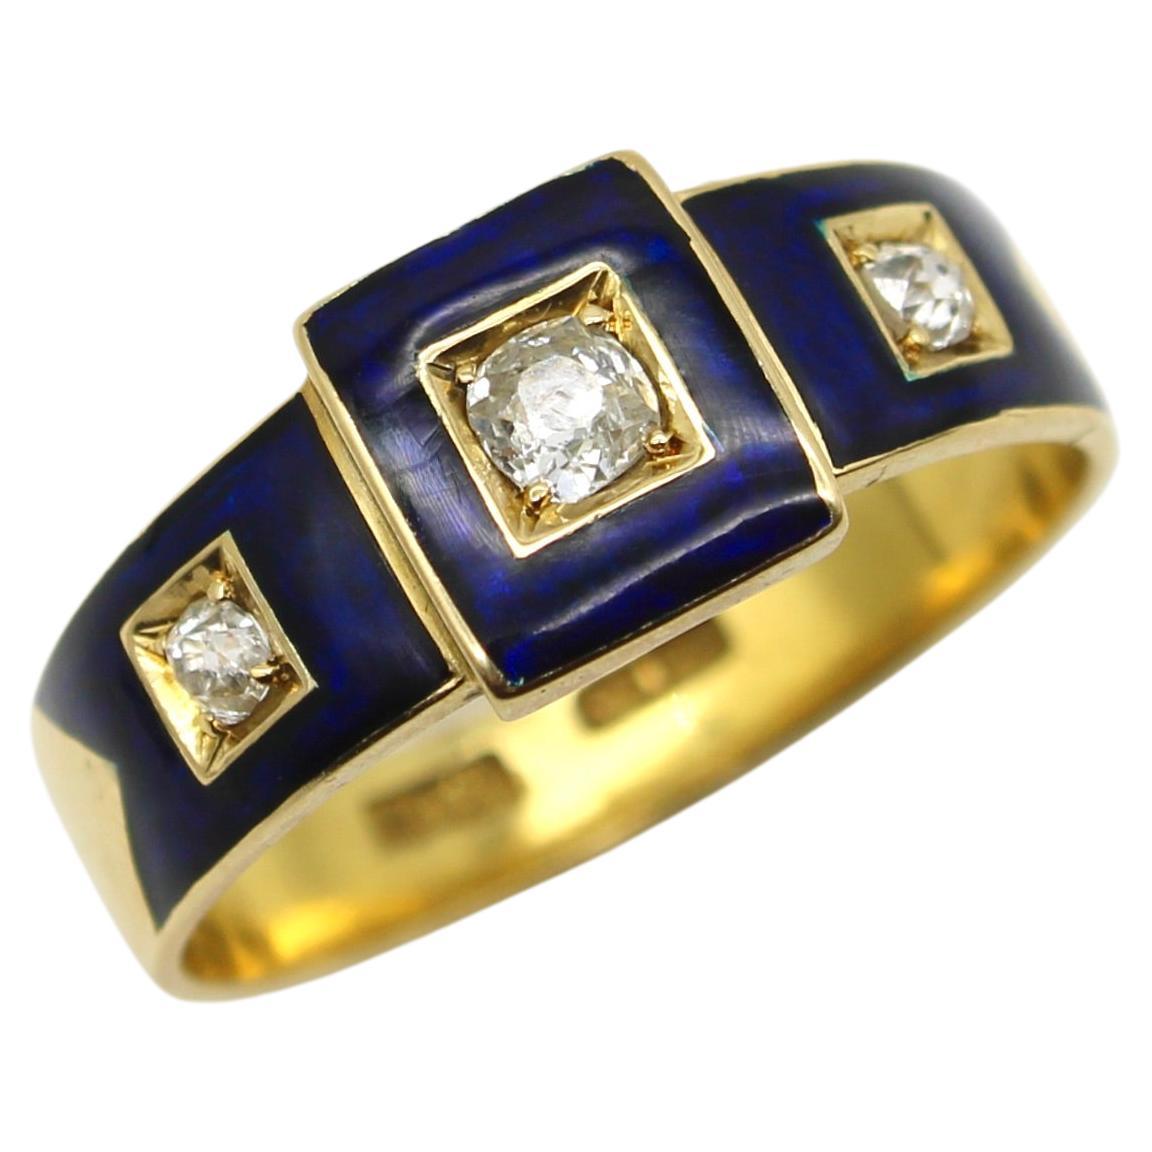 18K Gold Early Victorian Diamond Trilogy Ring with Blue Enamel Details 